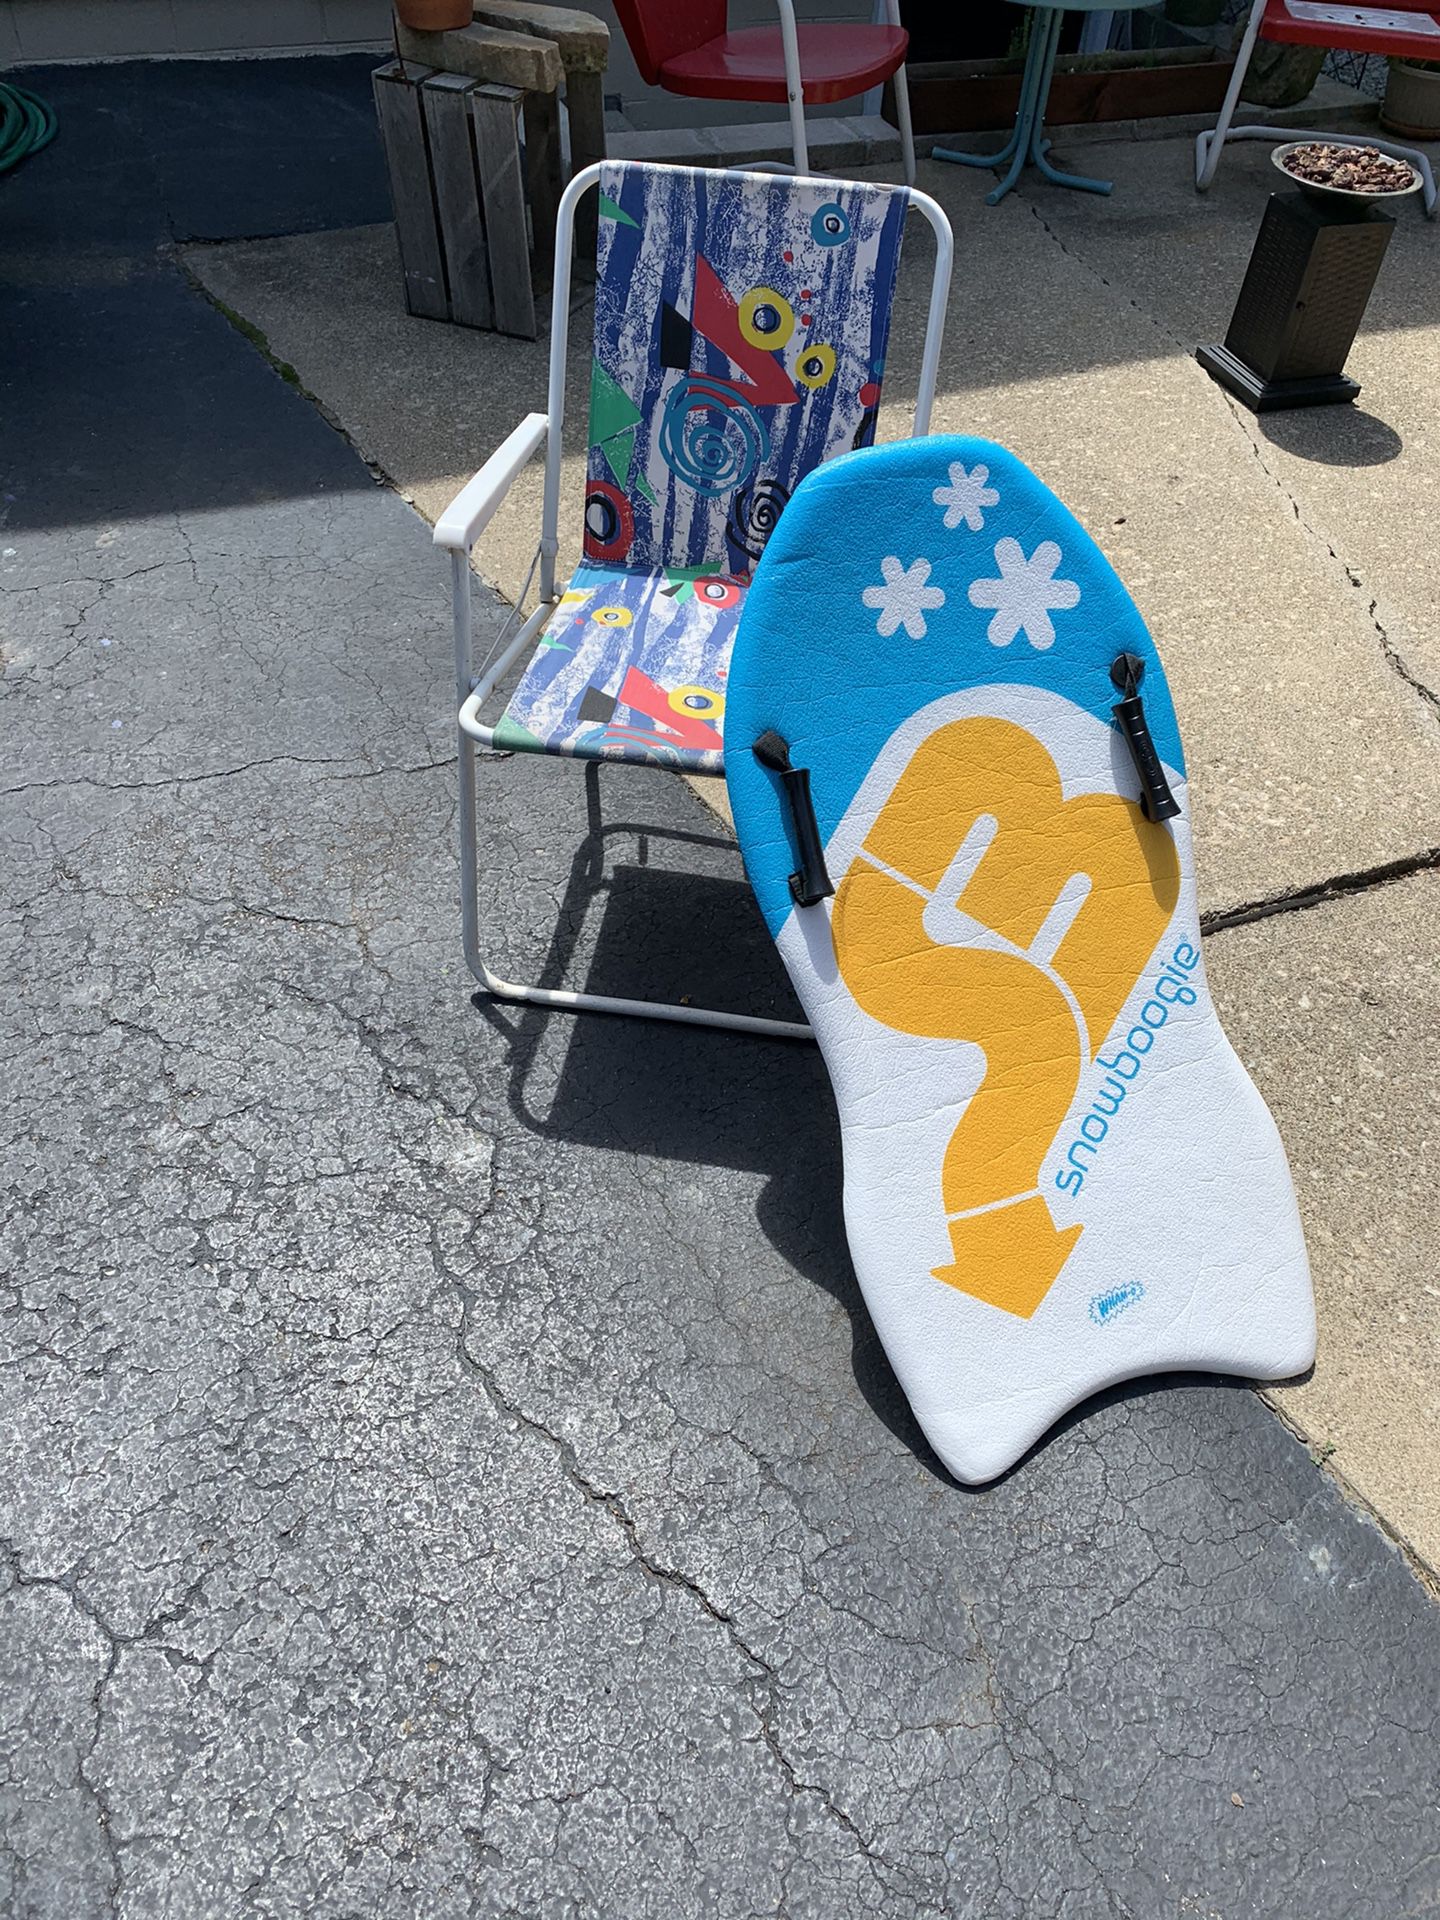 Fold up child’s chair and boogie board